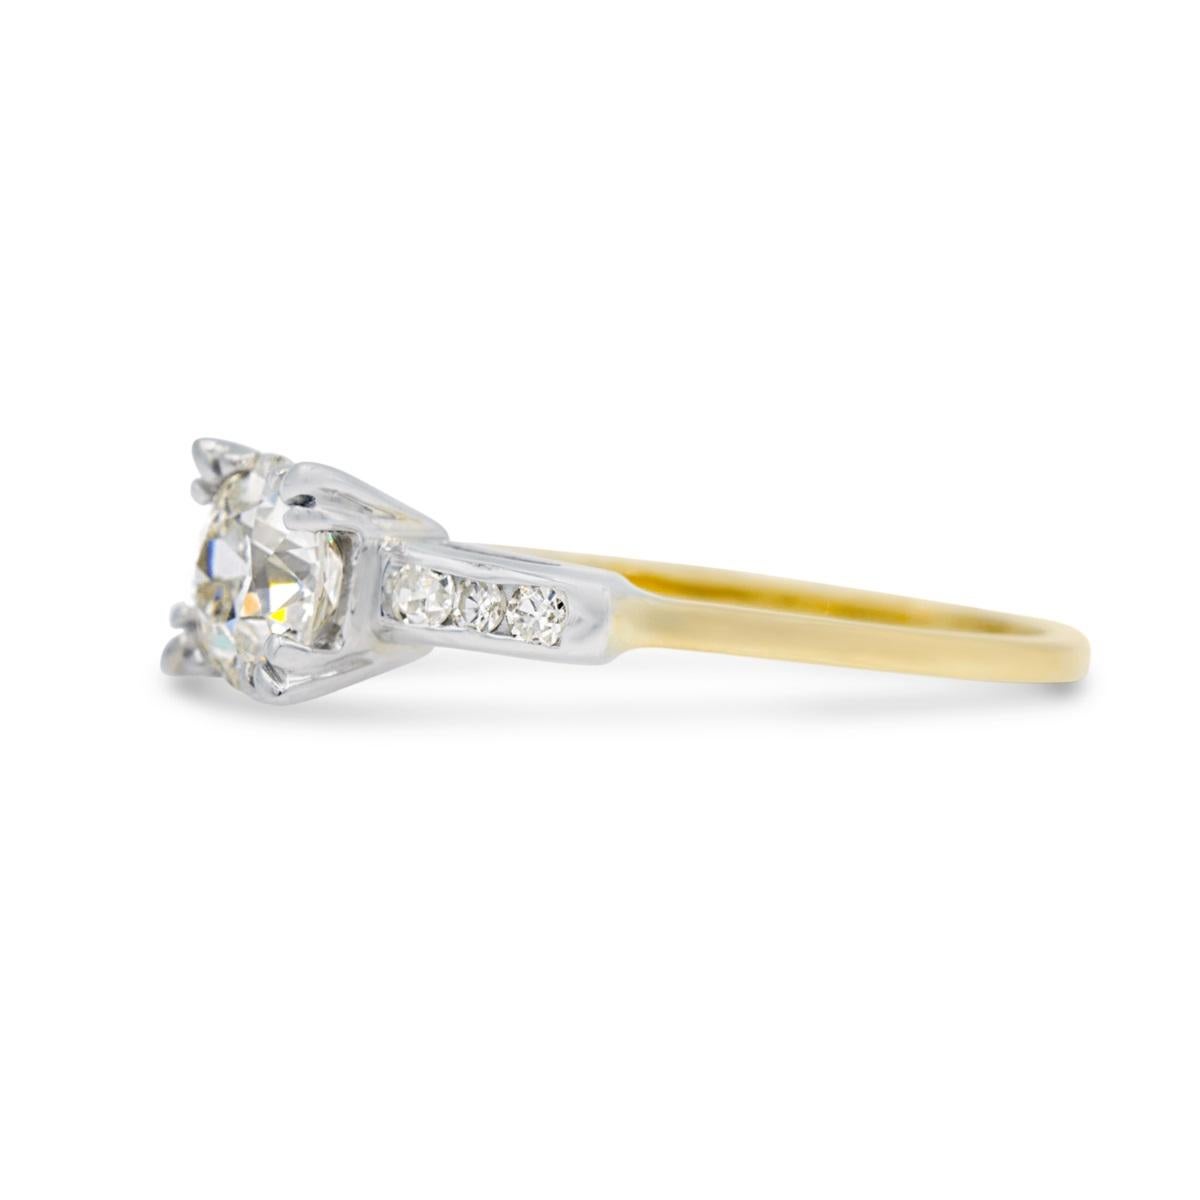 This classic Edwardian era two-tone engagement ring is centered by a beautiful 1.04 old European diamond. The ring is set with fishtail prongs and shouldered by 6 channel set single cut diamonds. We love the two-tone look, as a way to spice up this